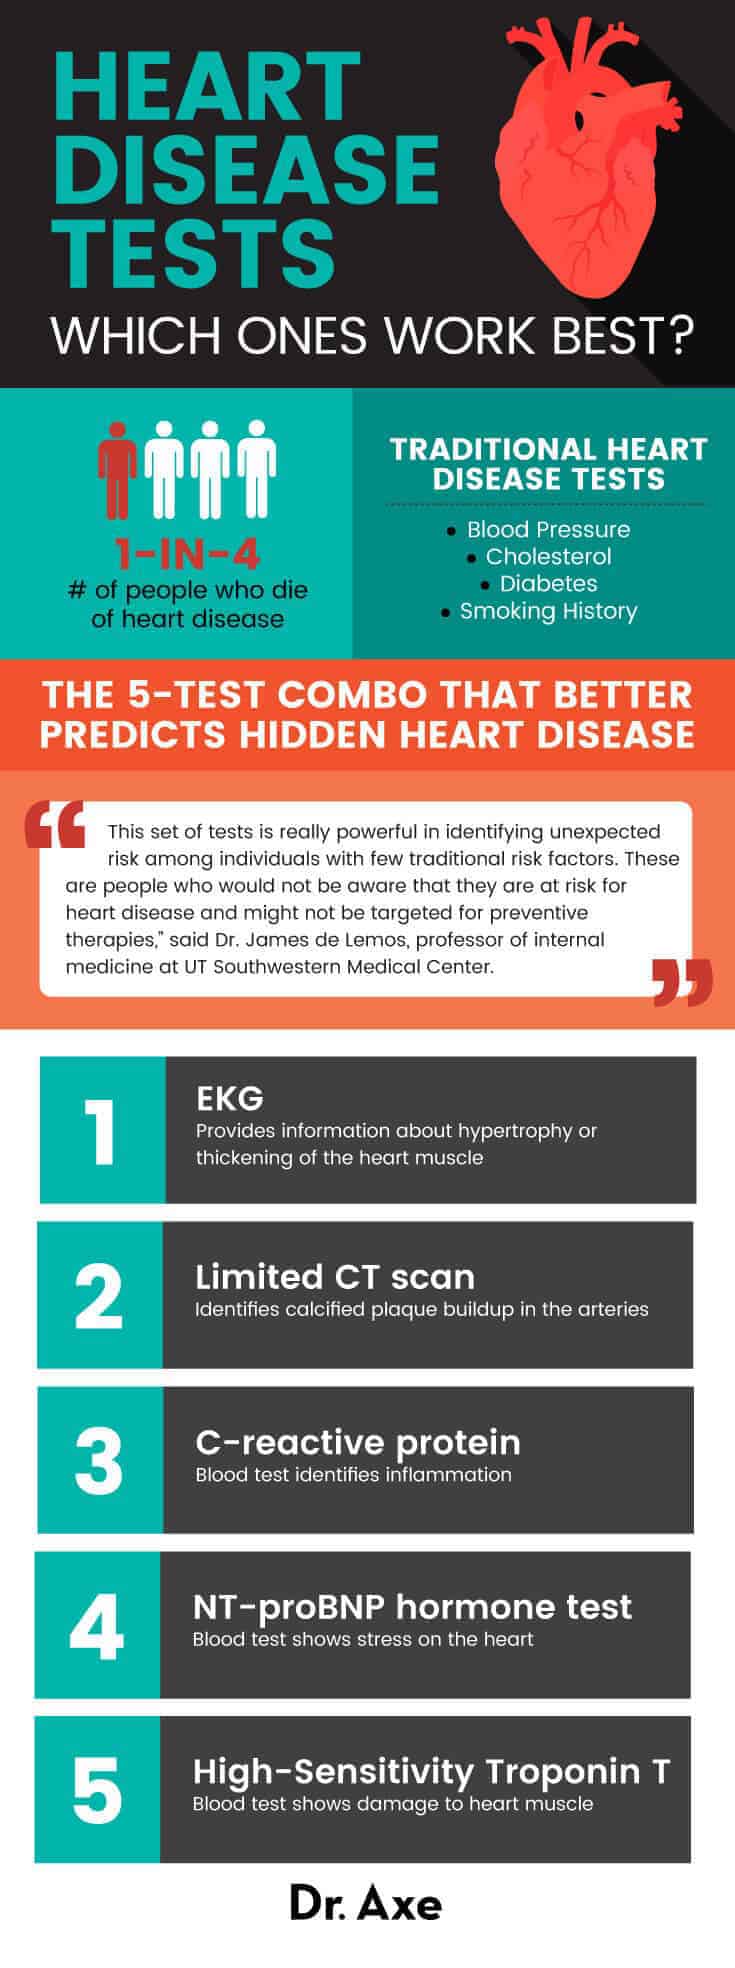 Heart disease tests - Dr. Axe